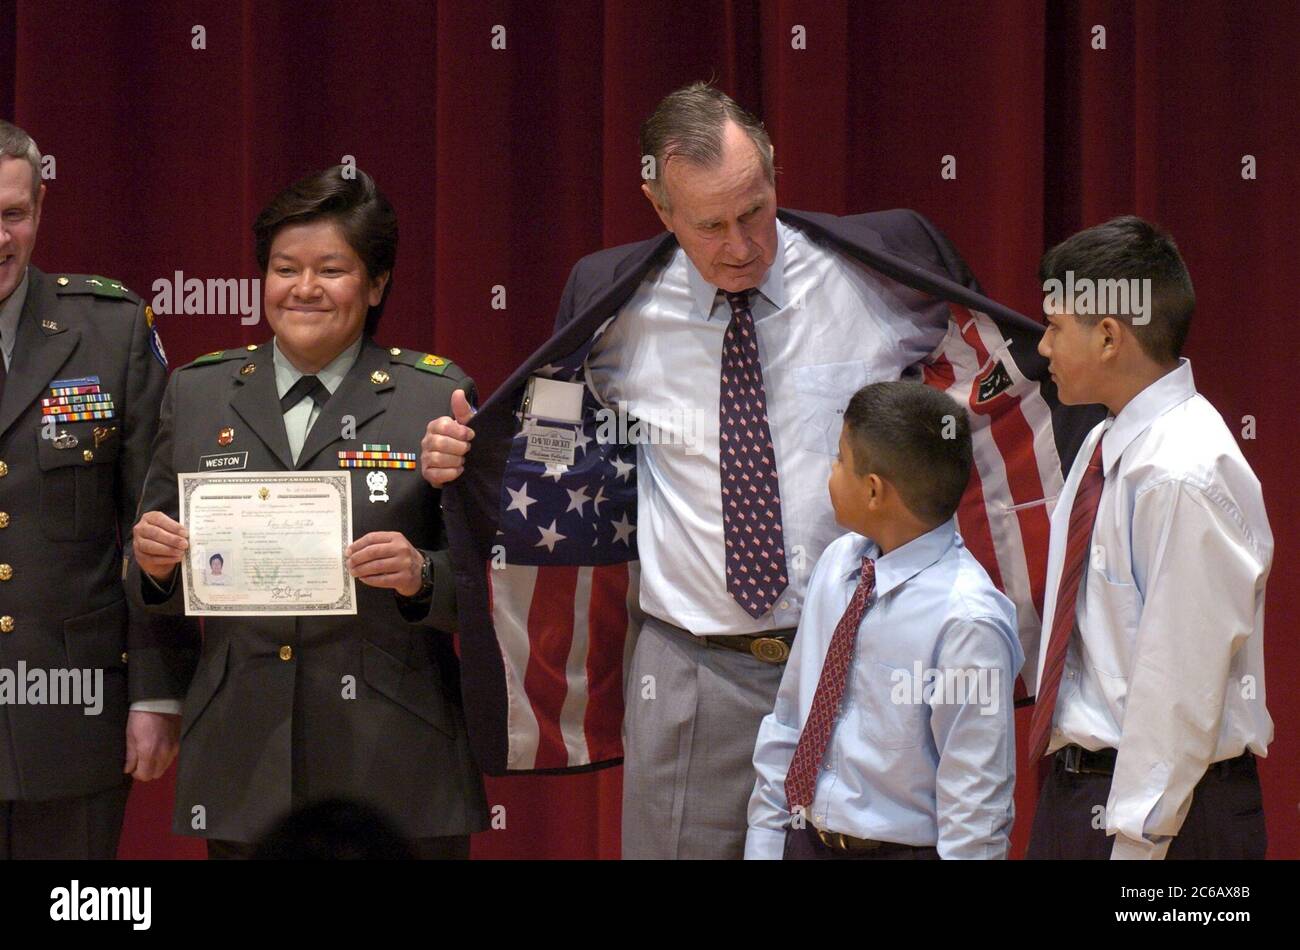 College Station, Texas USA, March 11, 2005: Former U.S. President George HW Bush shows off his sports coat with an American flag lining to Edward (9) and Alex (12) Weston as their mother, Sgt. Rosa Weston, shows her new U.S. citizenship certificate at ceremonies at Texas A&M University. ©Bob Daemmrich Stock Photo